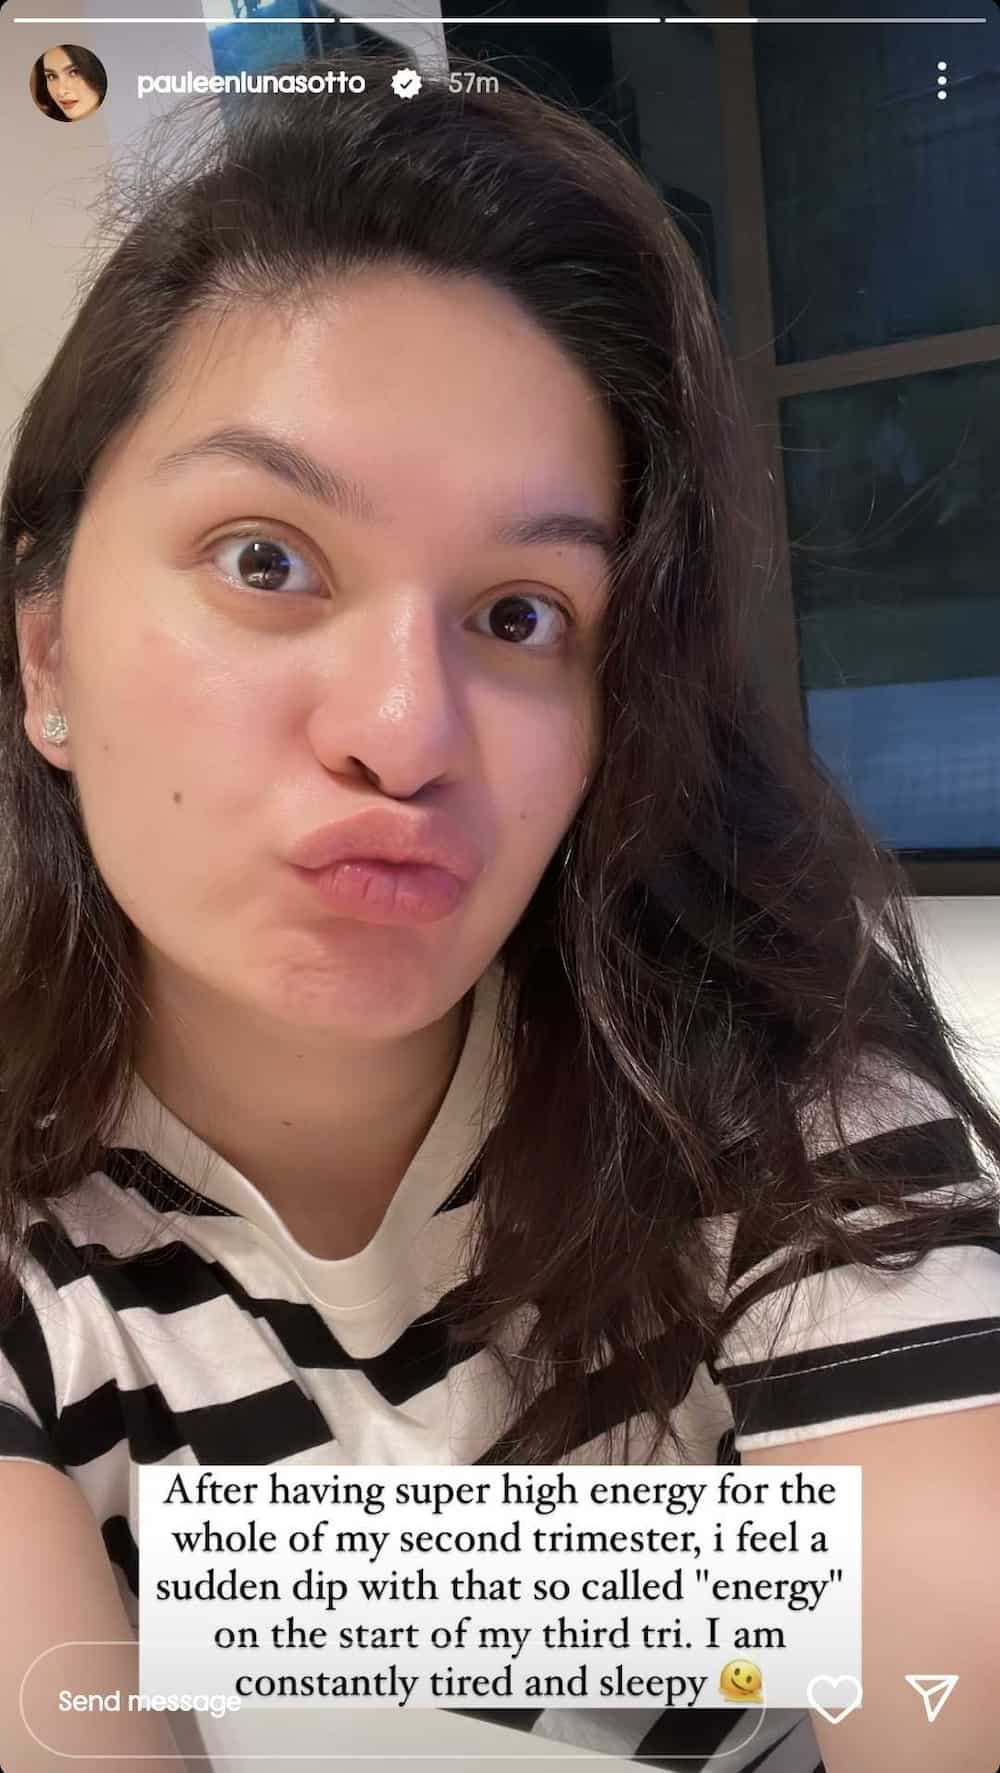 Pauleen Luna posts pregnancy update: "I am constantly tired and sleepy"